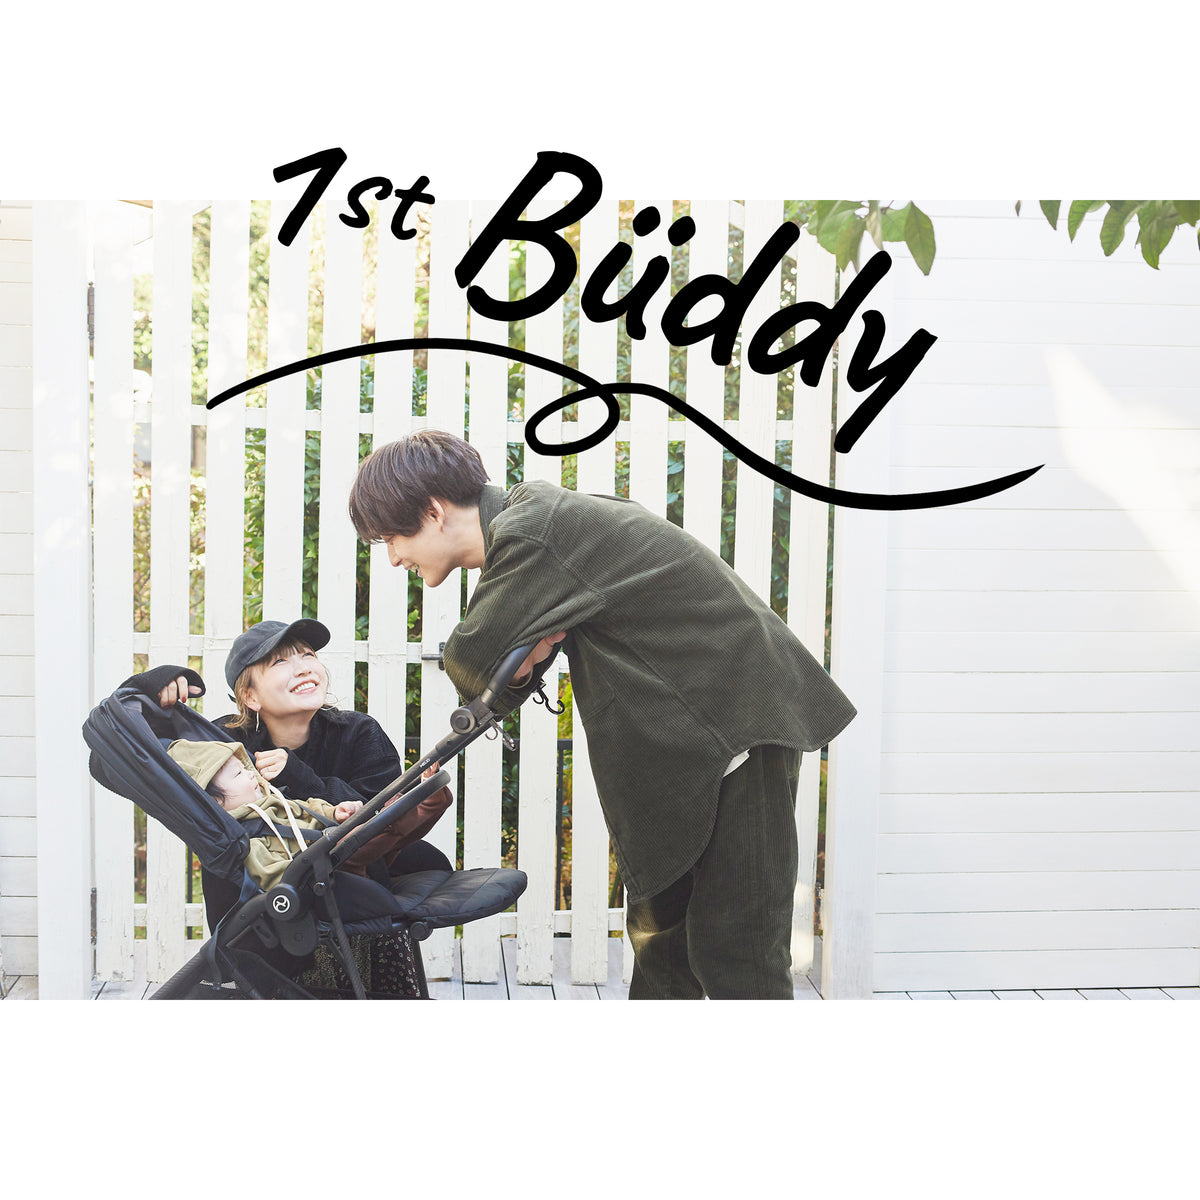 1st Buddy official store